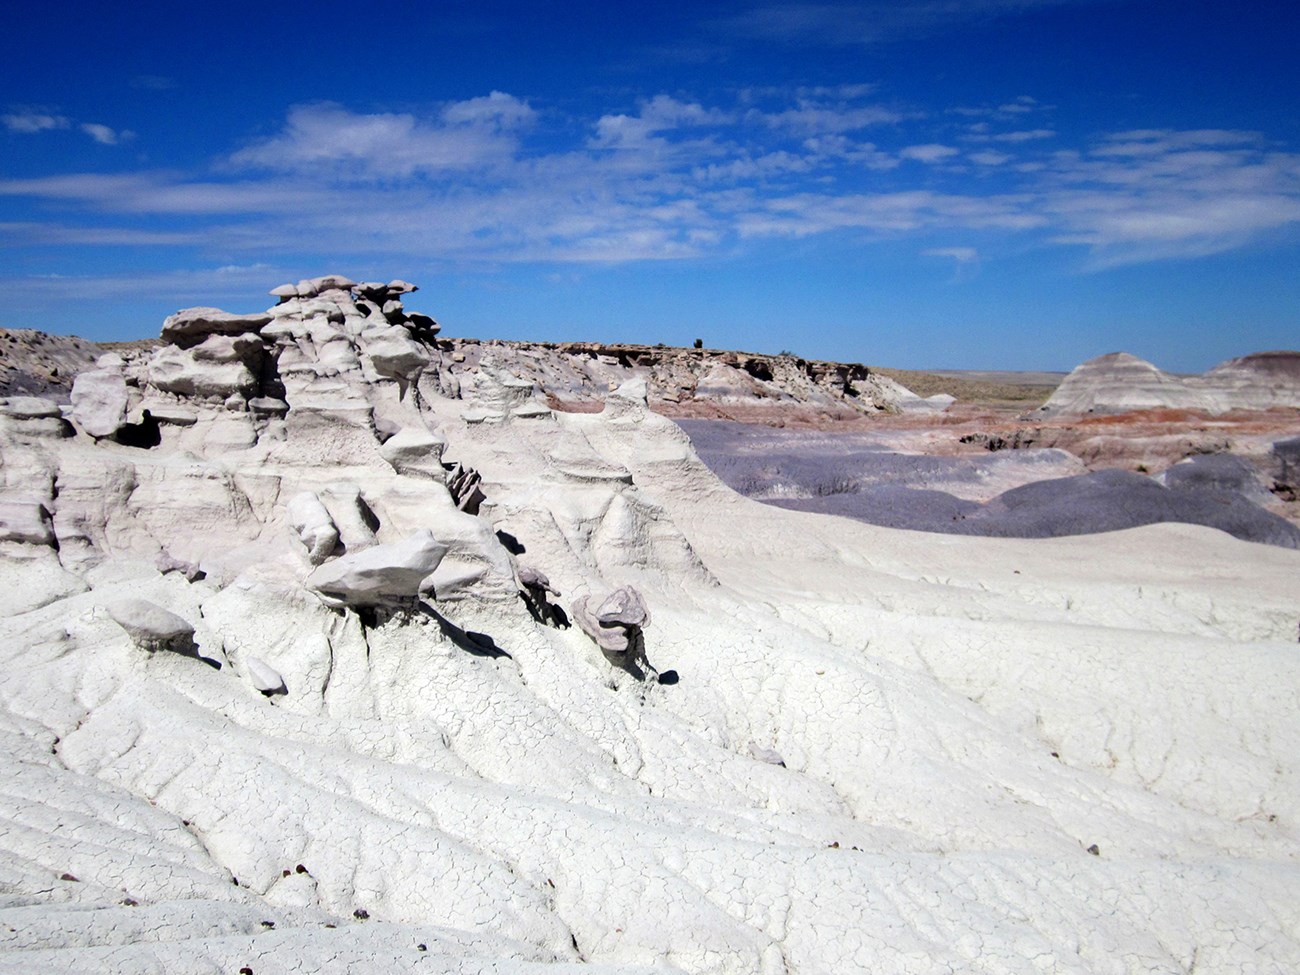 White geological formation called the Sandcastle with the colorful badlands in the distance of Red Basin under mostly blue sky.